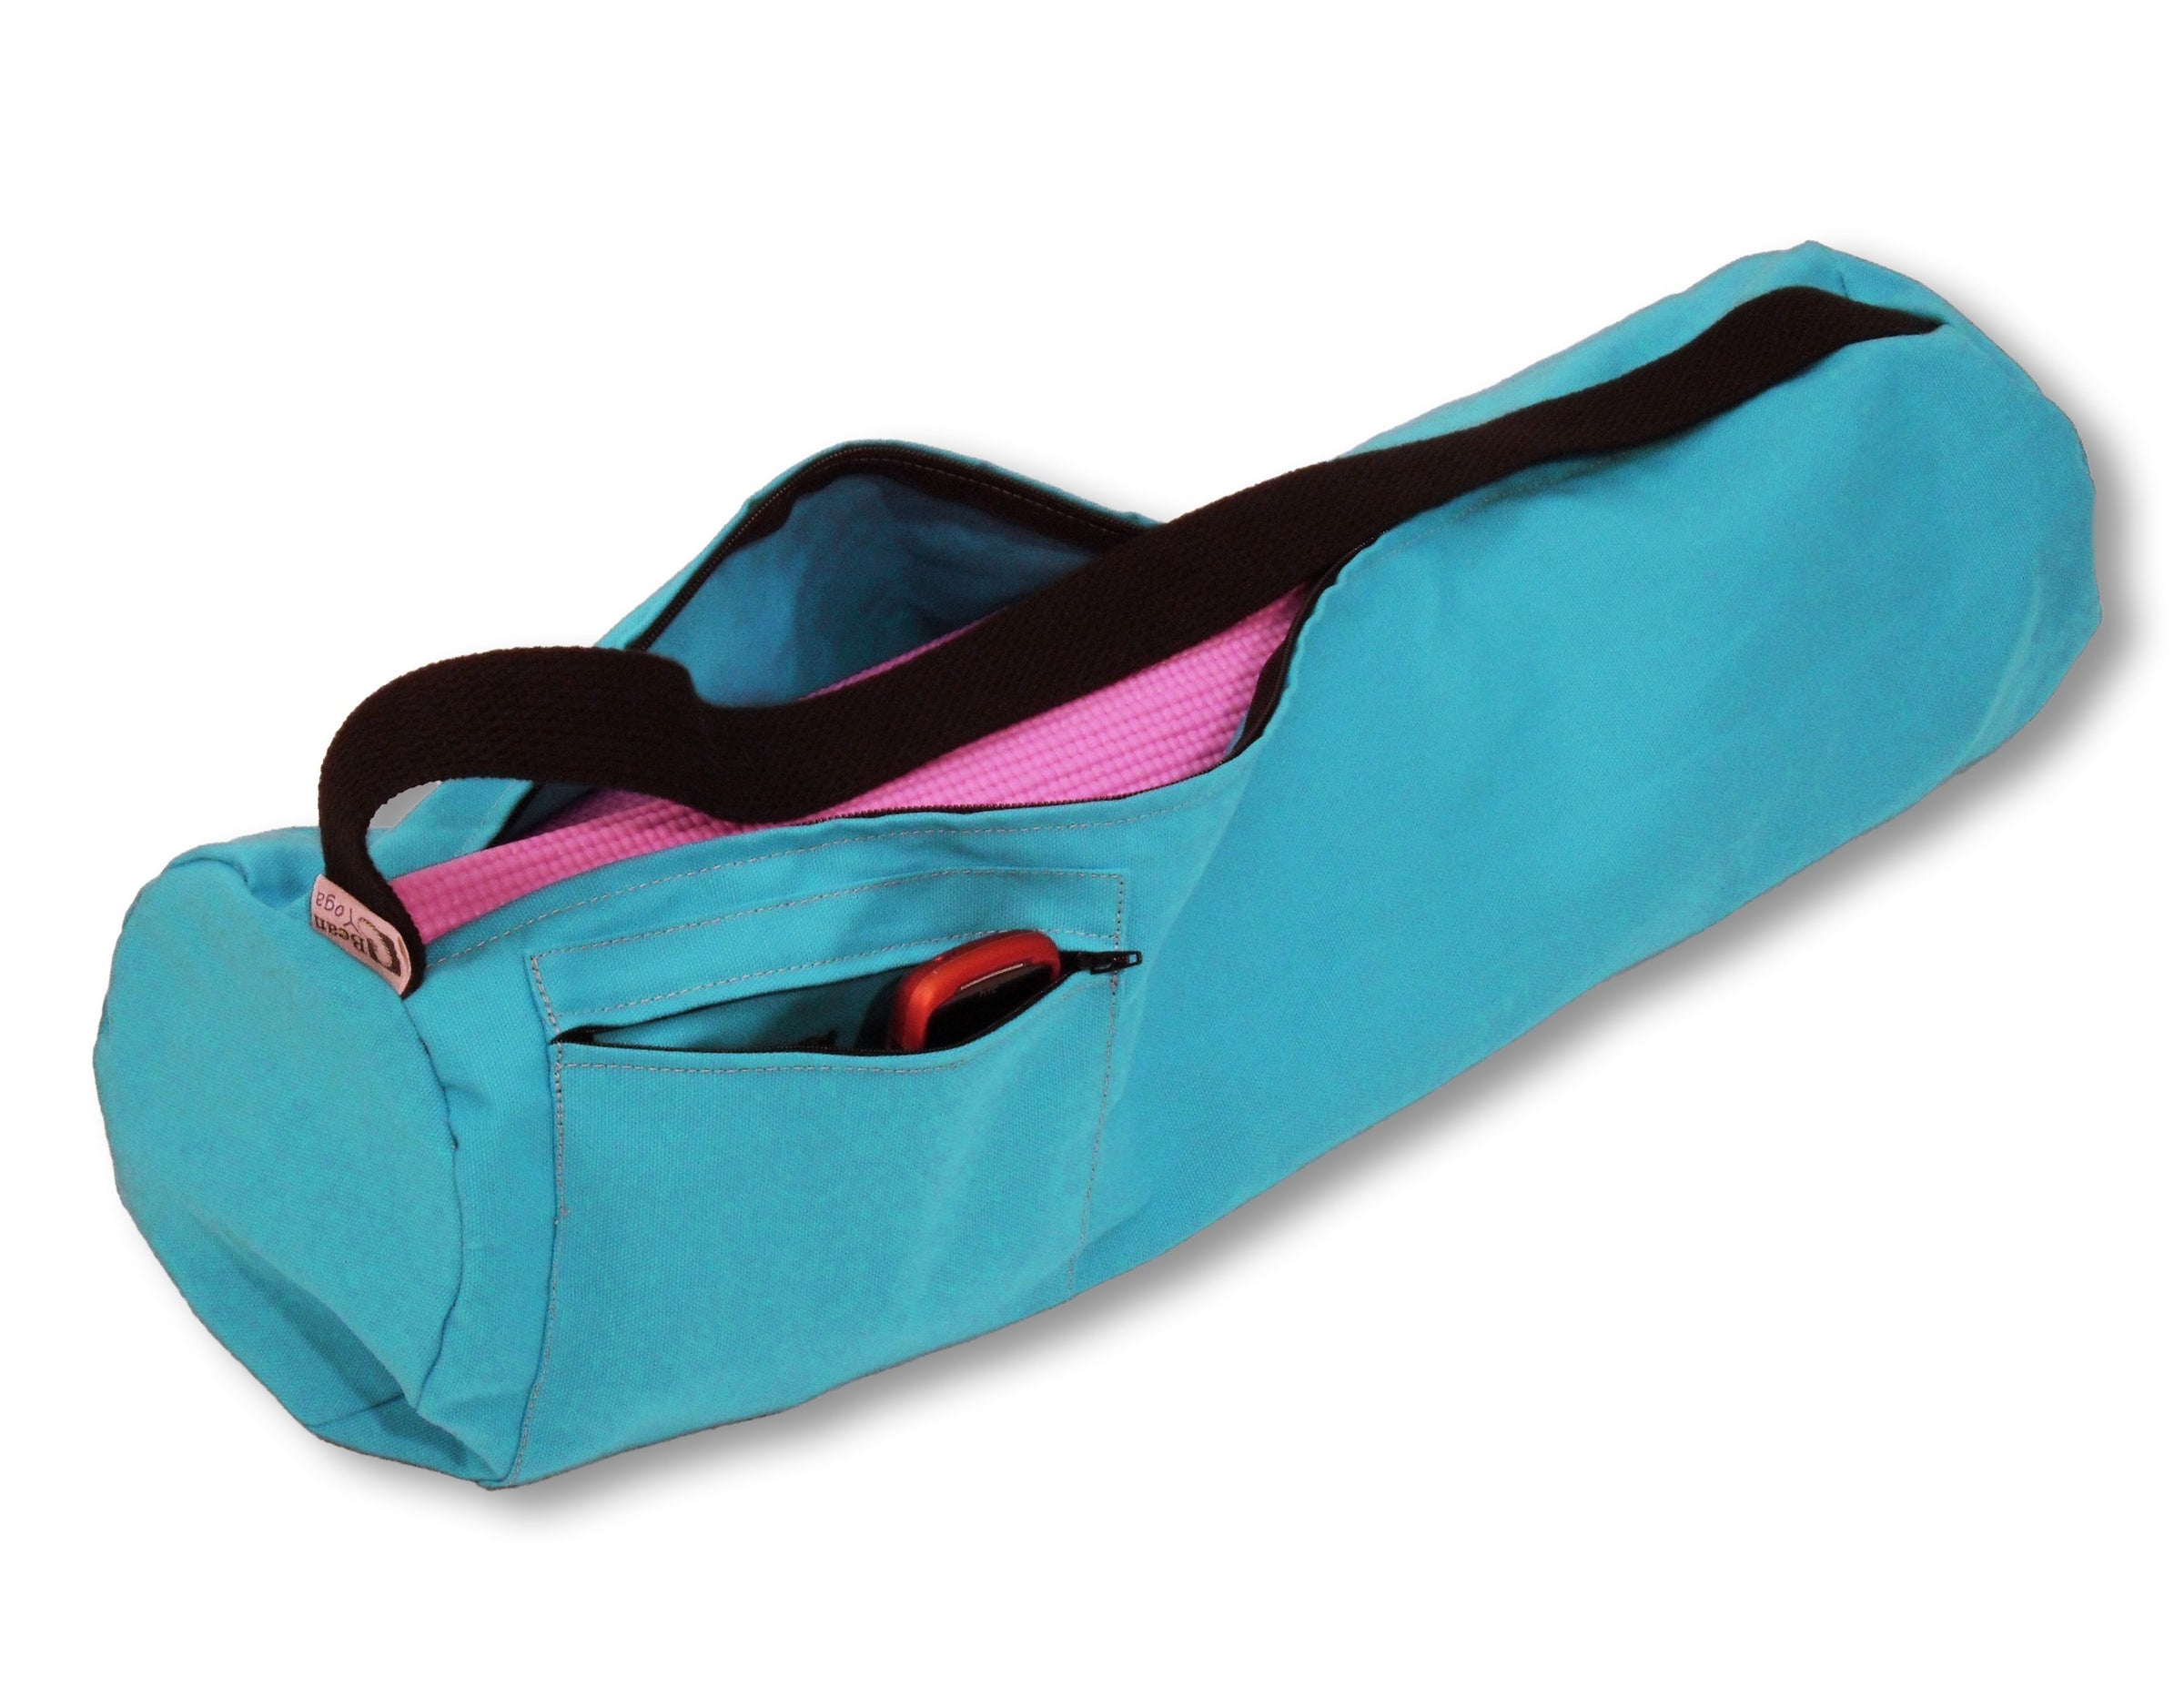 Yoga Mat Carrying Tote Bag with Large Pockets - On Sale - Bed Bath & Beyond  - 33917285